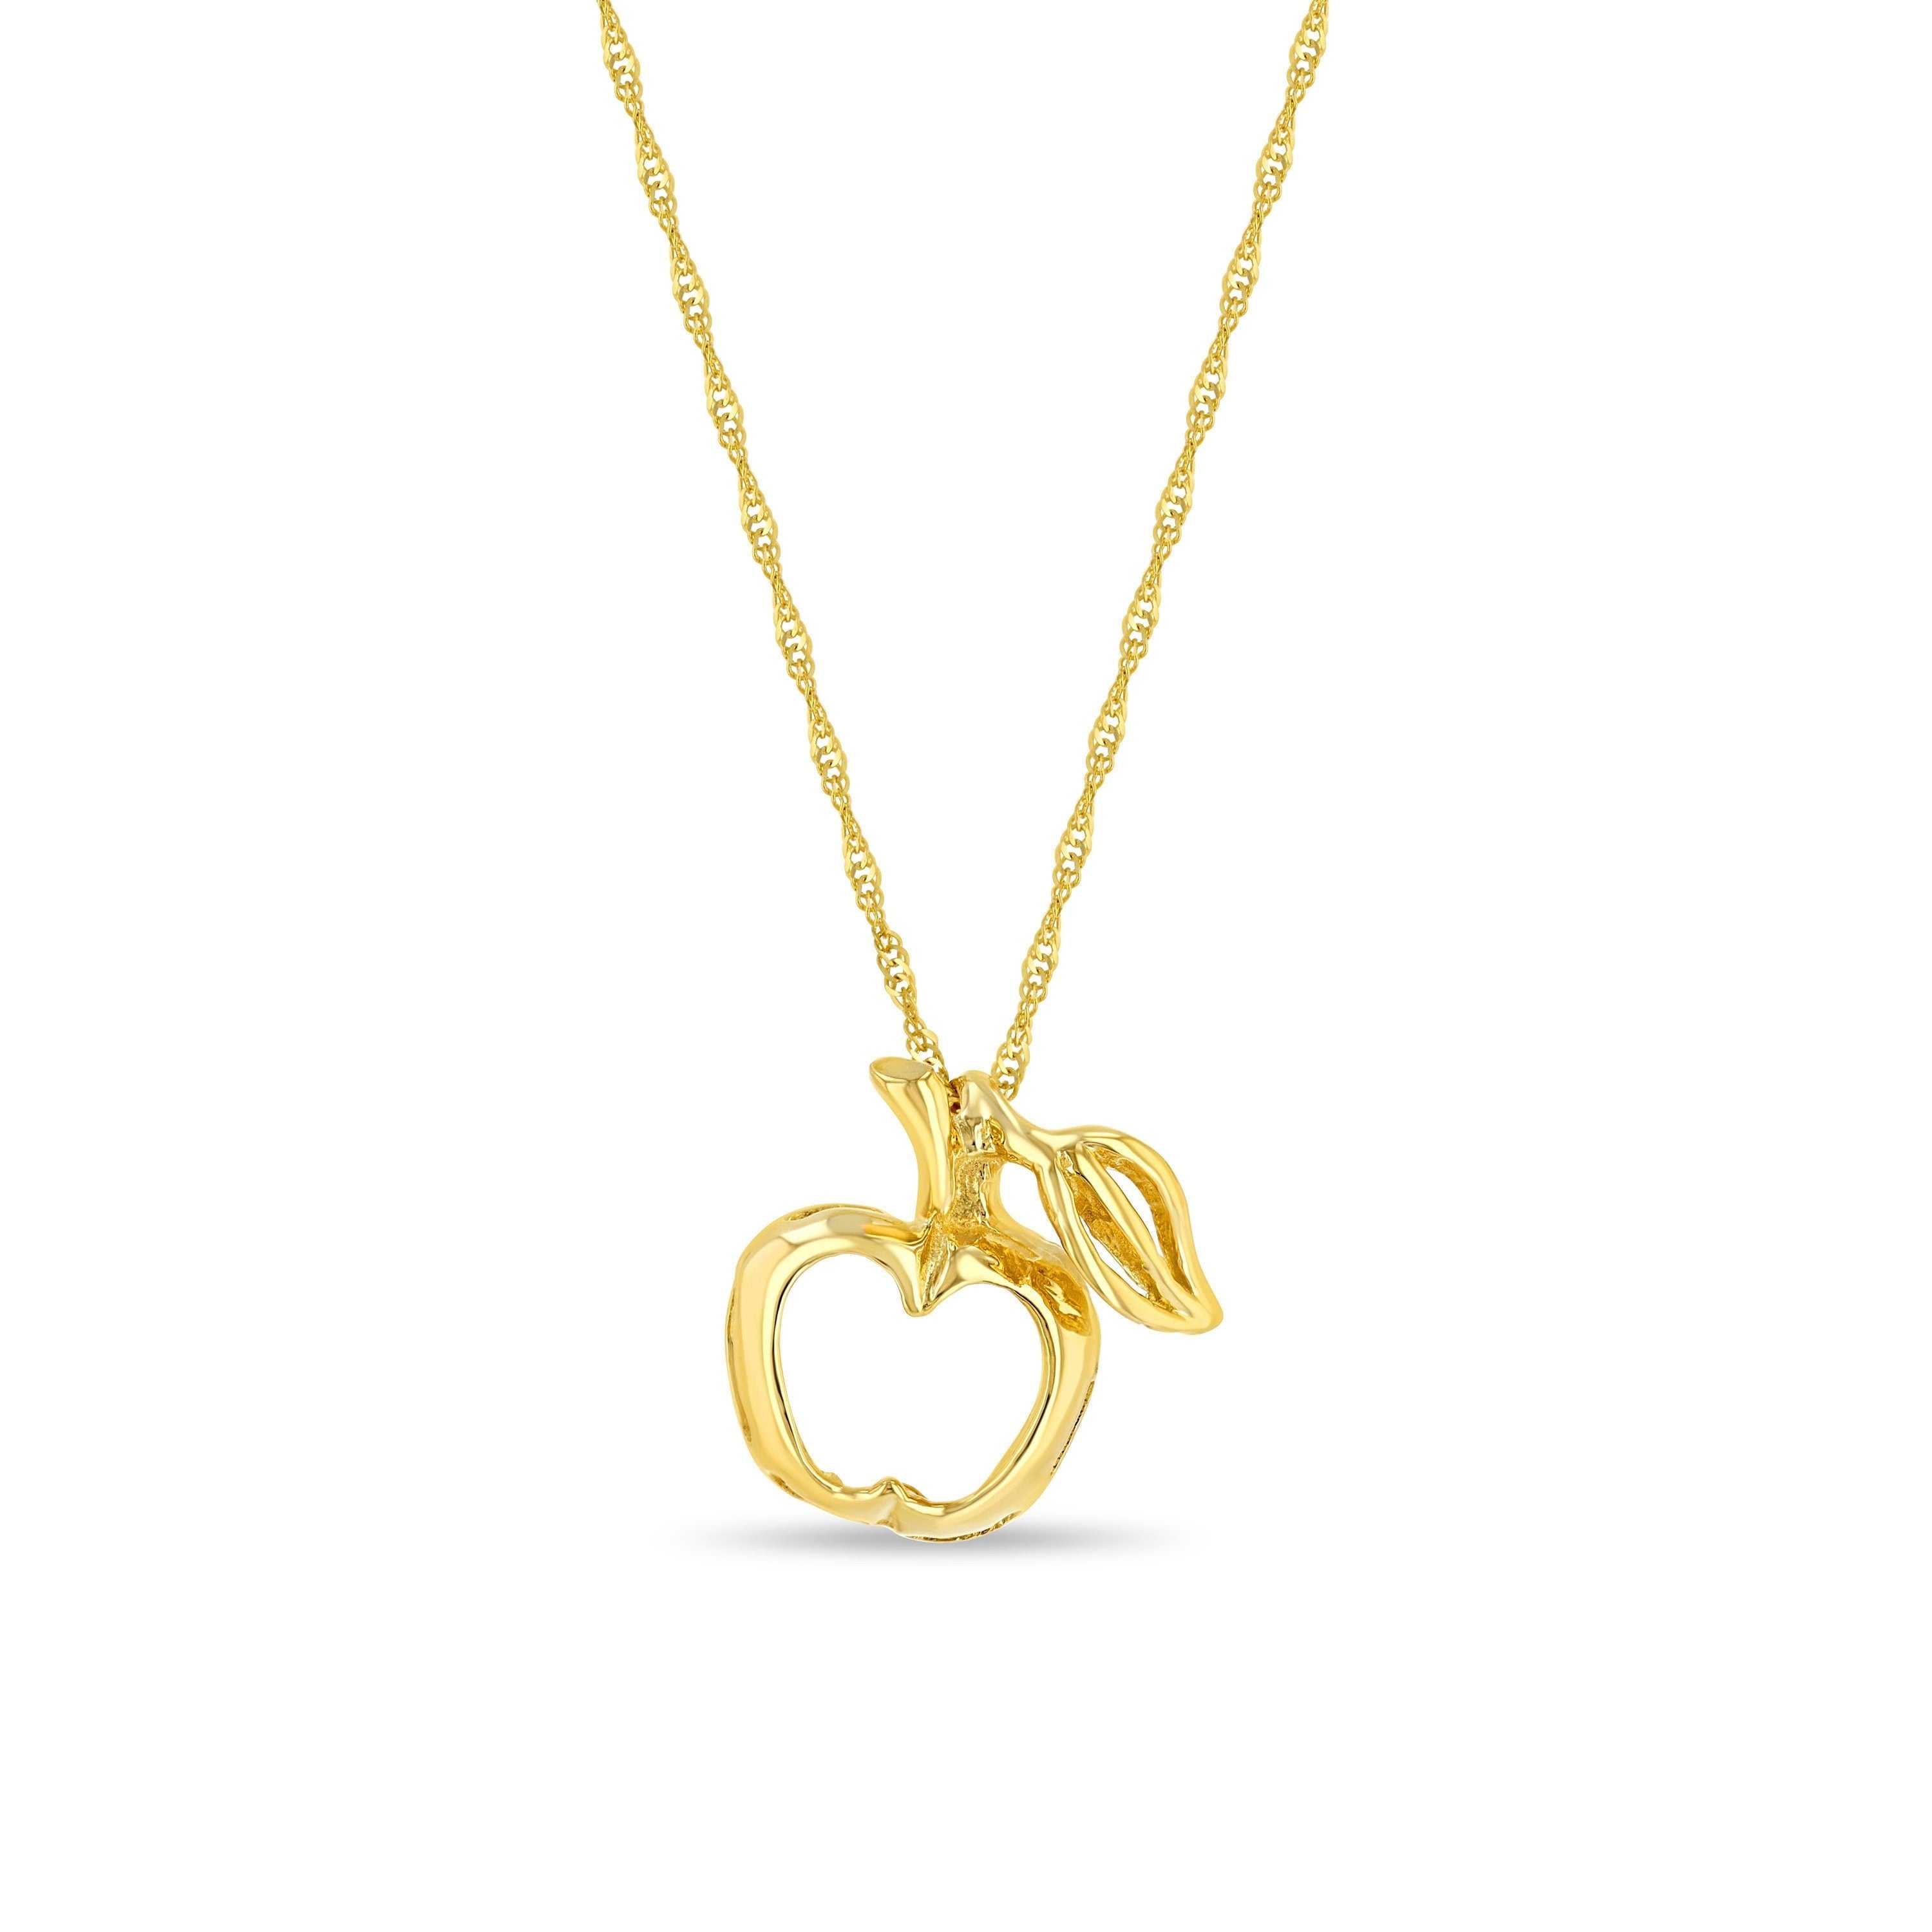 14k solid gold Apple pendant on 18" solid gold chain